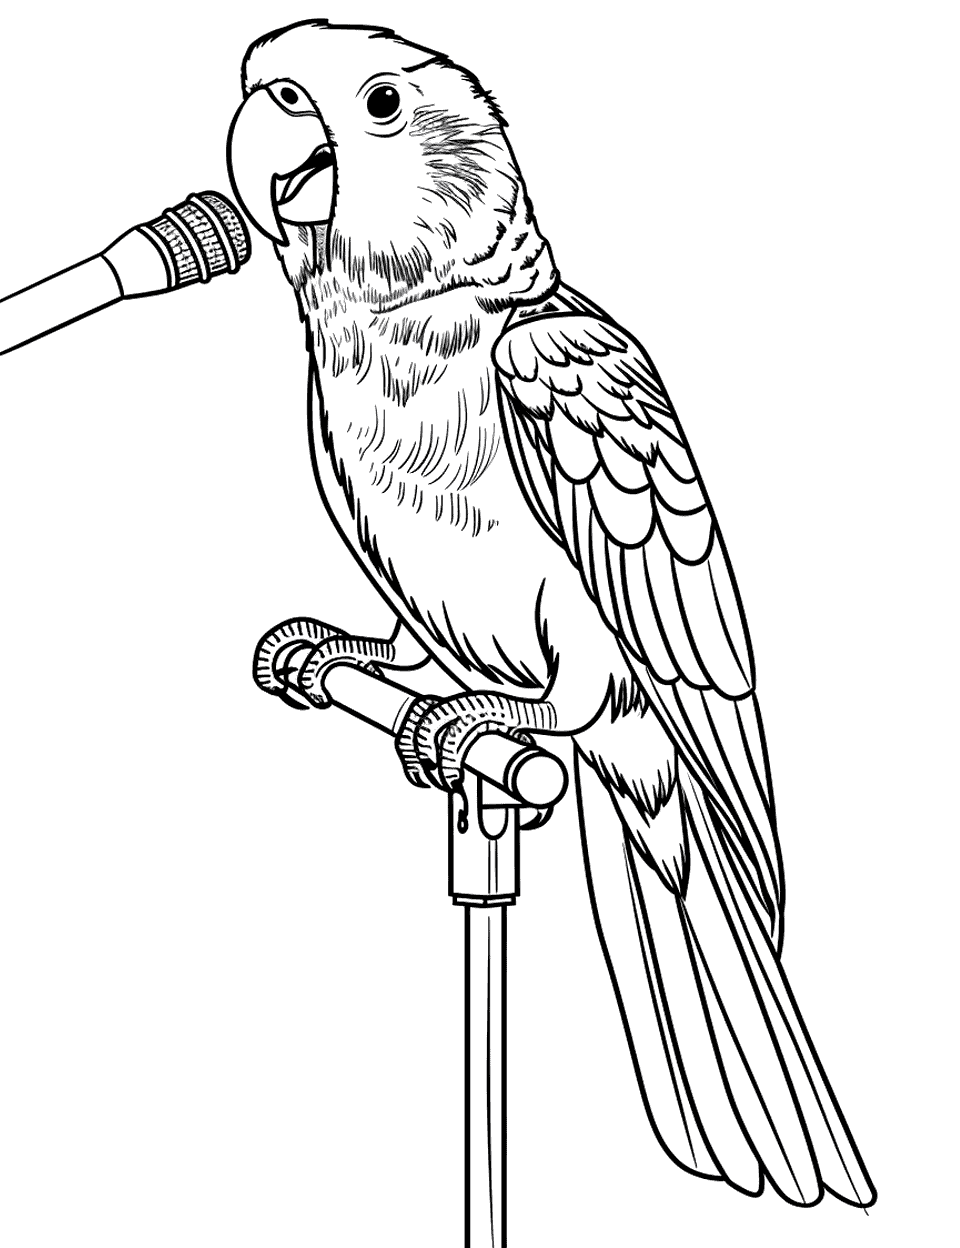 Parrot Singing into a Microphone Coloring Page - A parrot playfully singing into a microphone stand.